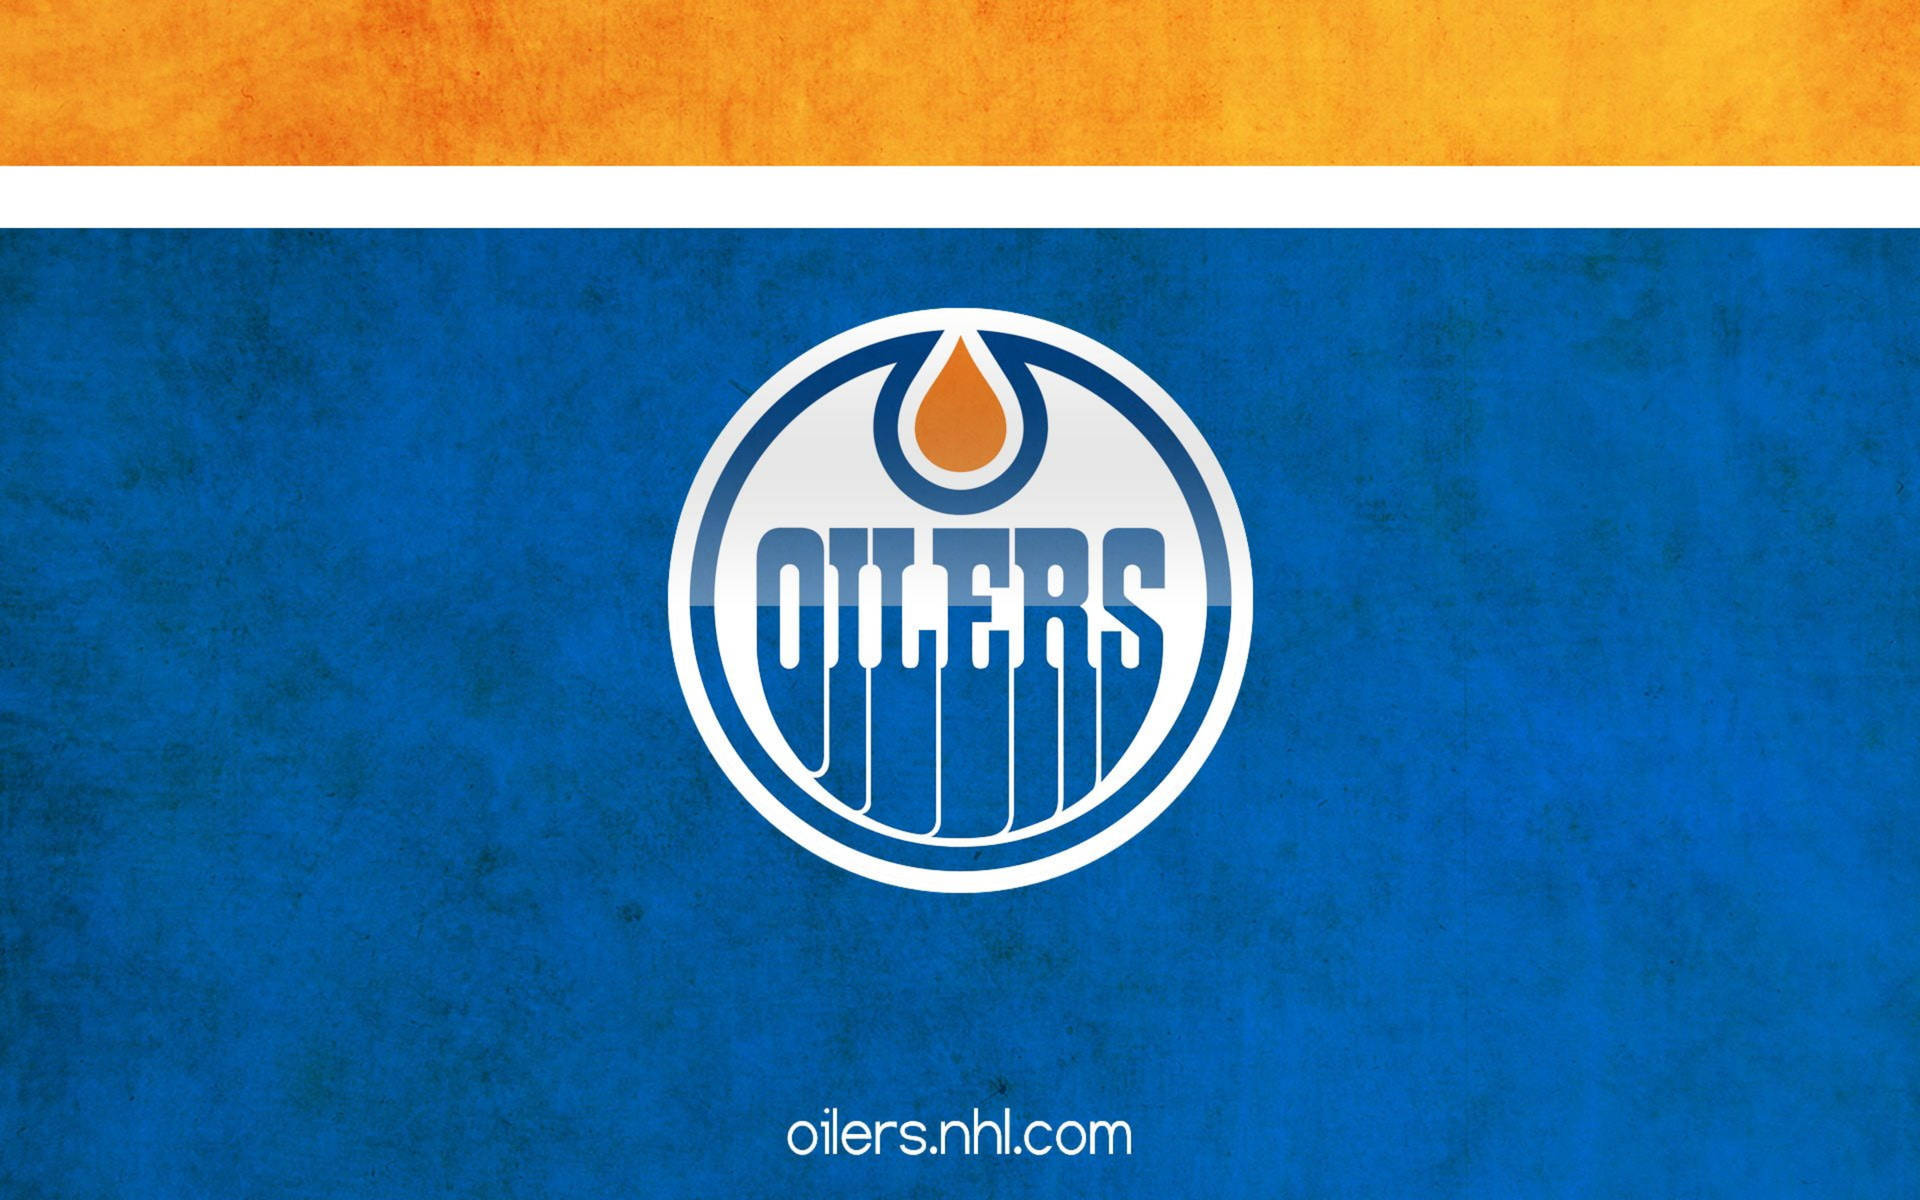 edmonton-oilers-in-action-during-a-high-stakes-hockey-game-xhjg3vdto8p8aatw.jpg